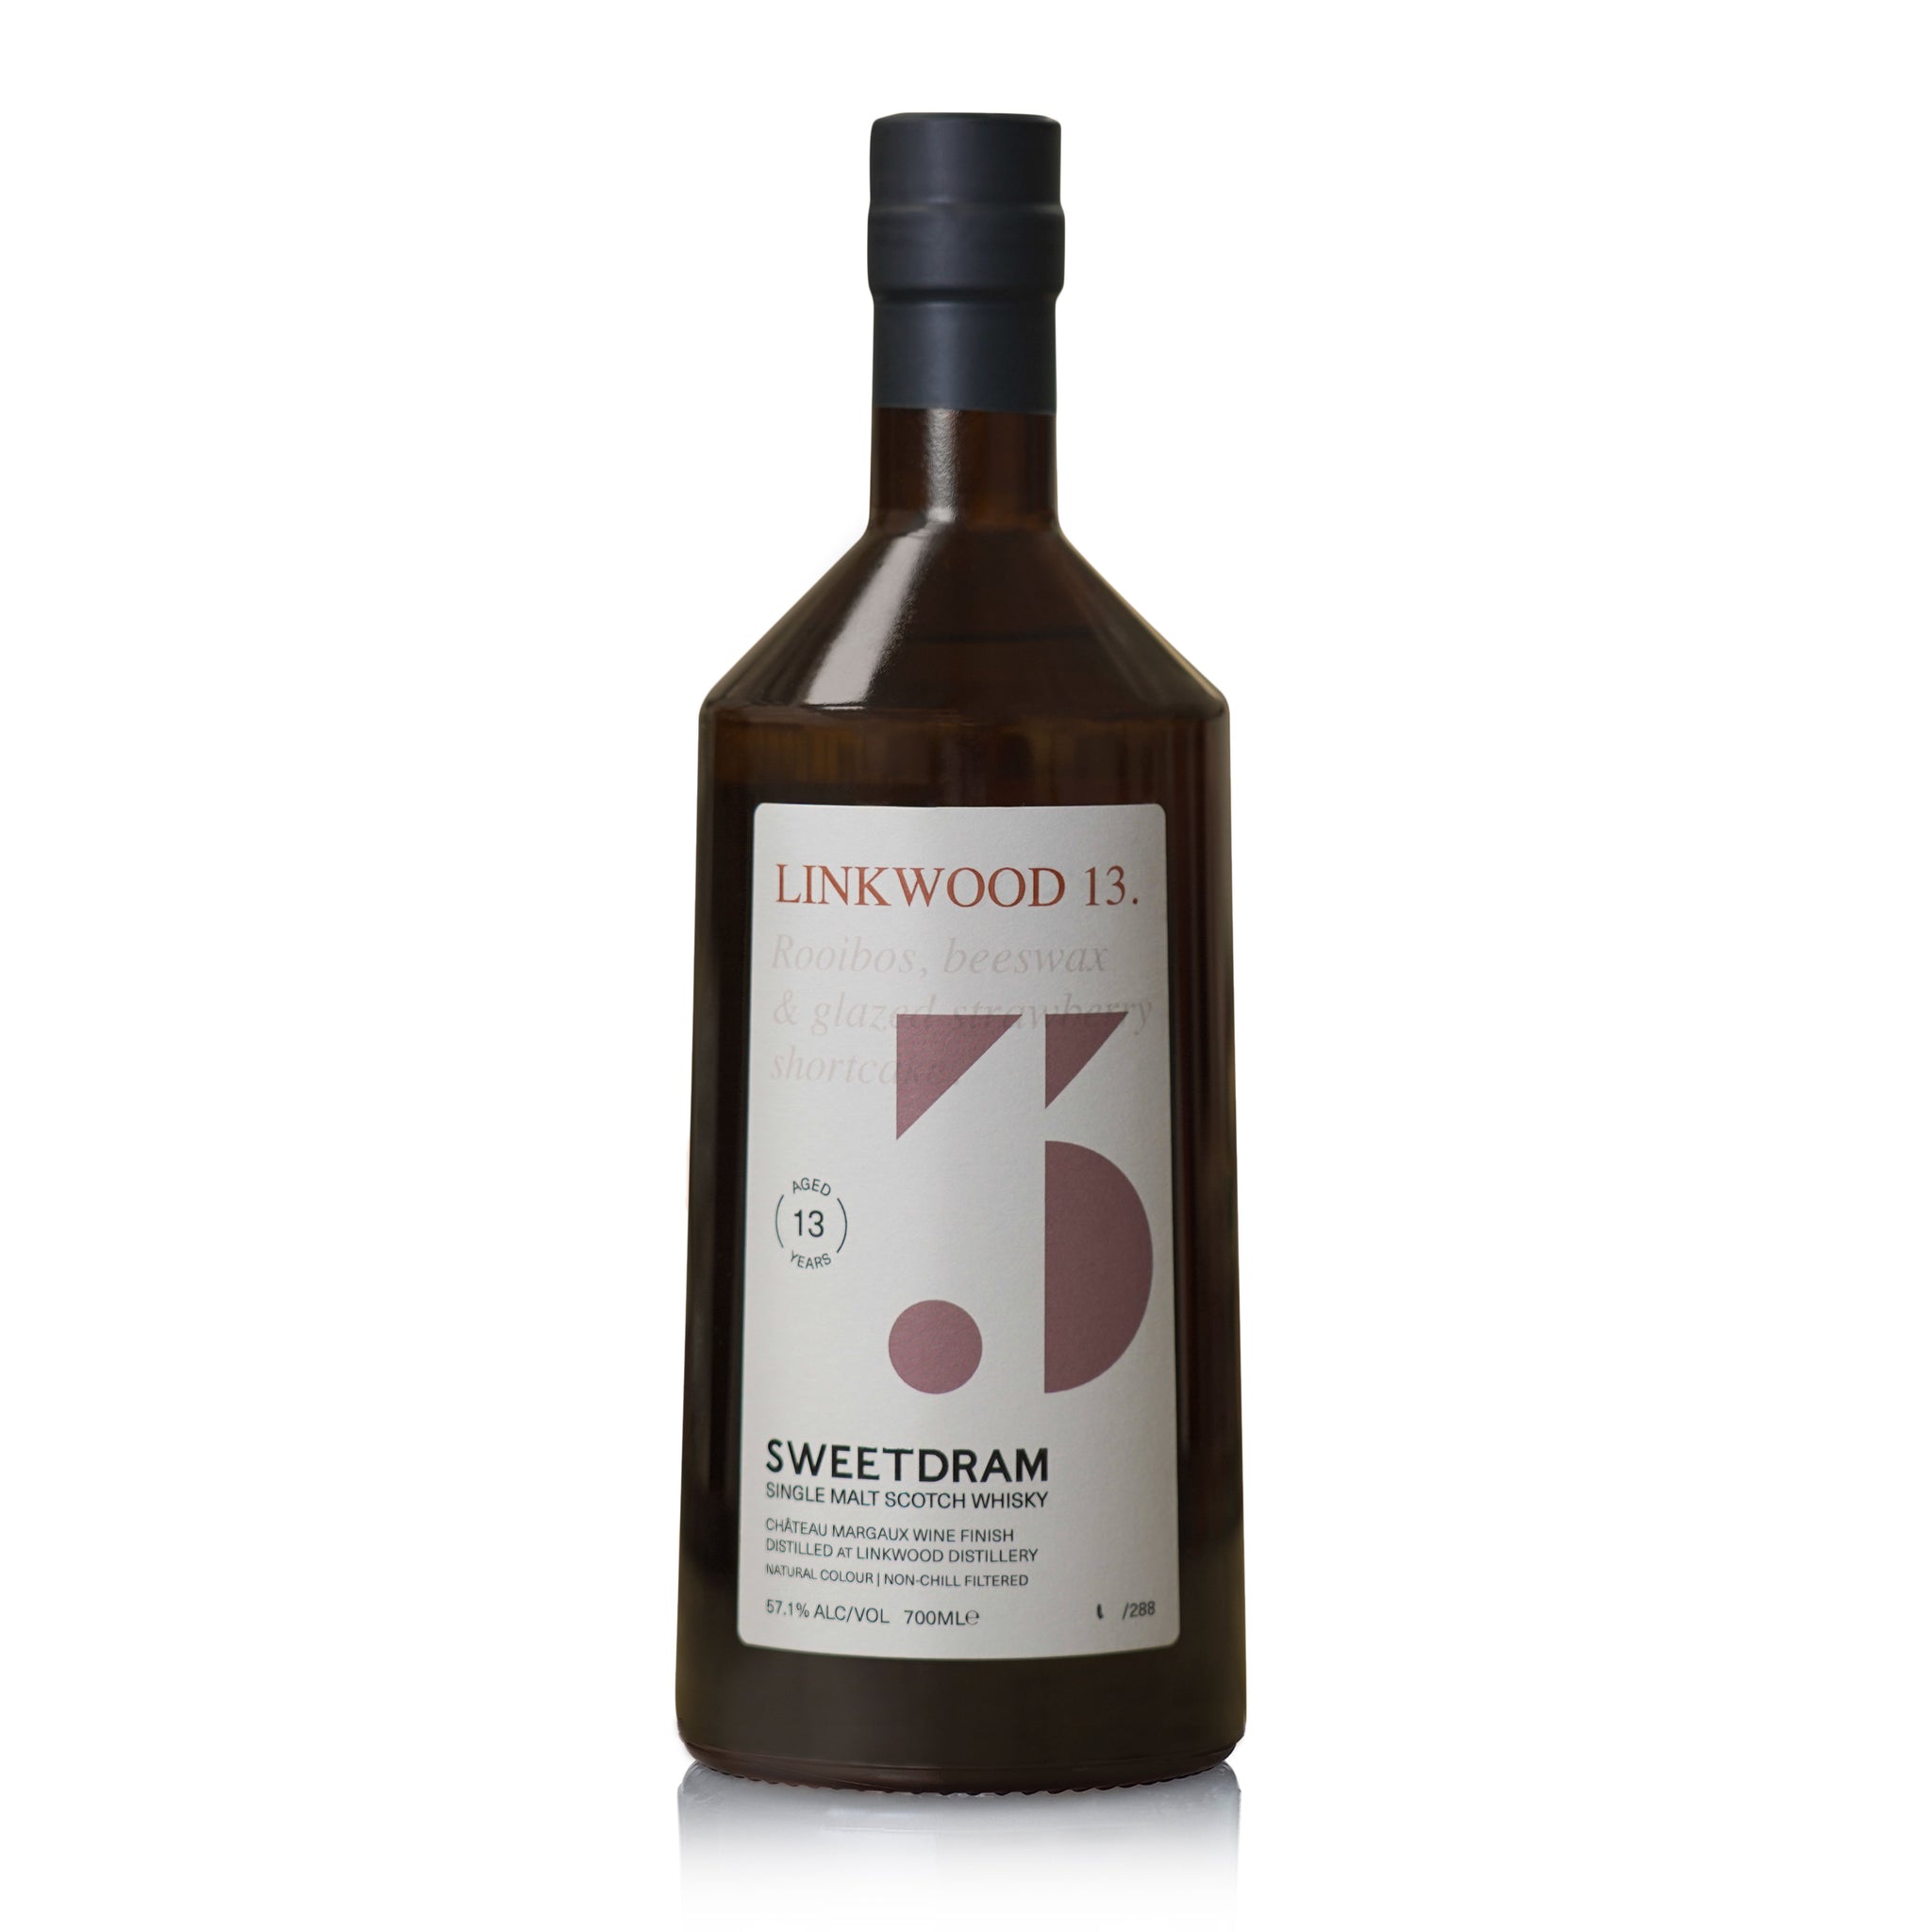 750ml bottle of Linkwood 14-year-old single-cask Whisky on a white background